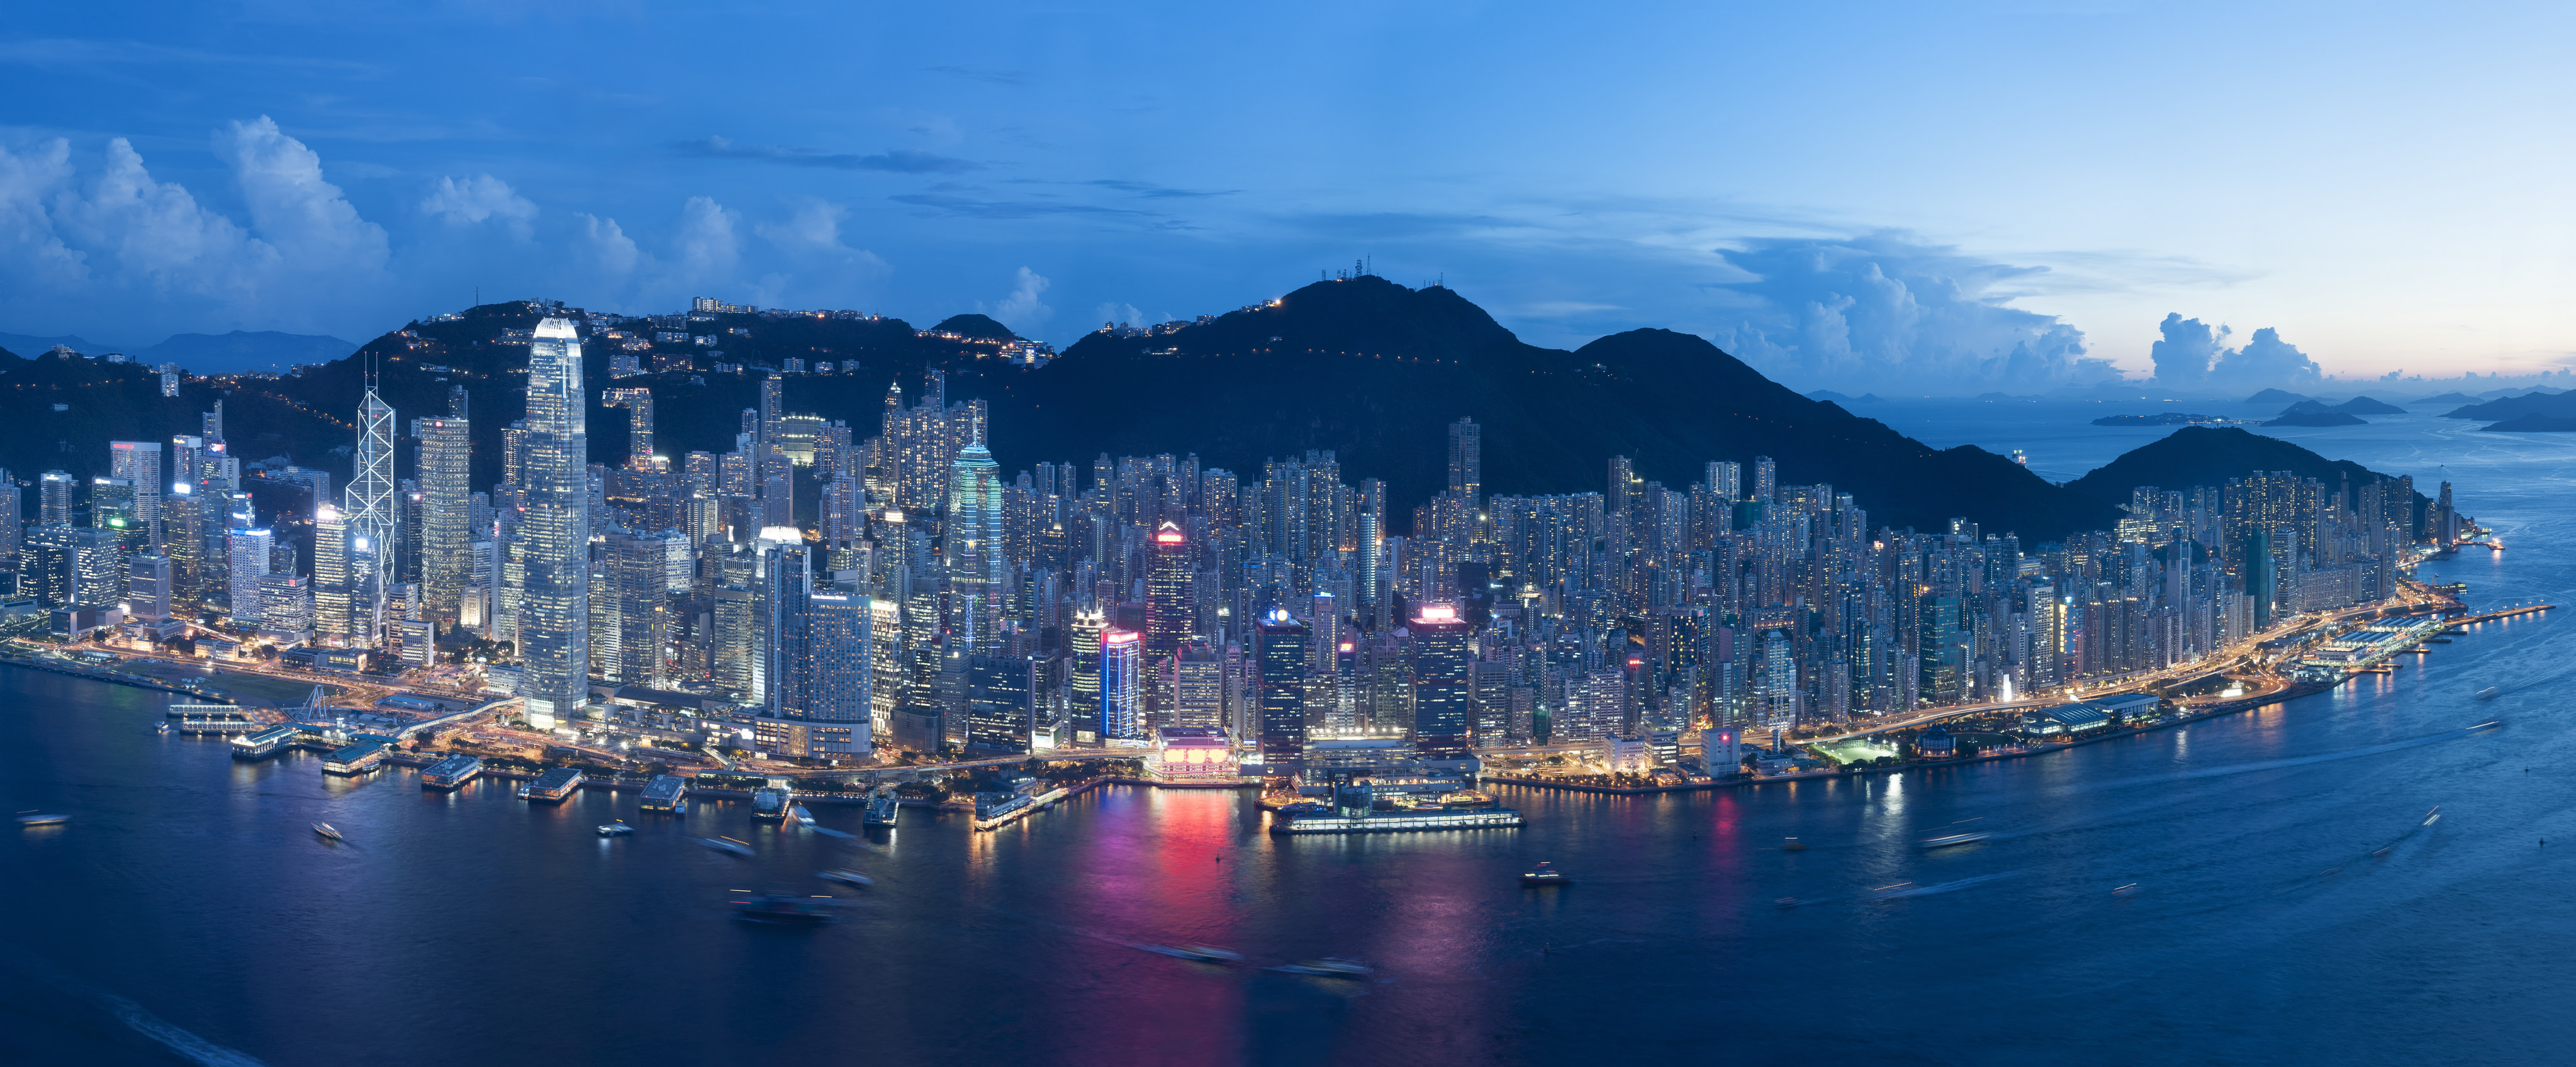 Hong Kong’s iconic skyline as seen at dusk, with skyscrapers lit up against a mountainous backdrop. Photo: Shutterstock